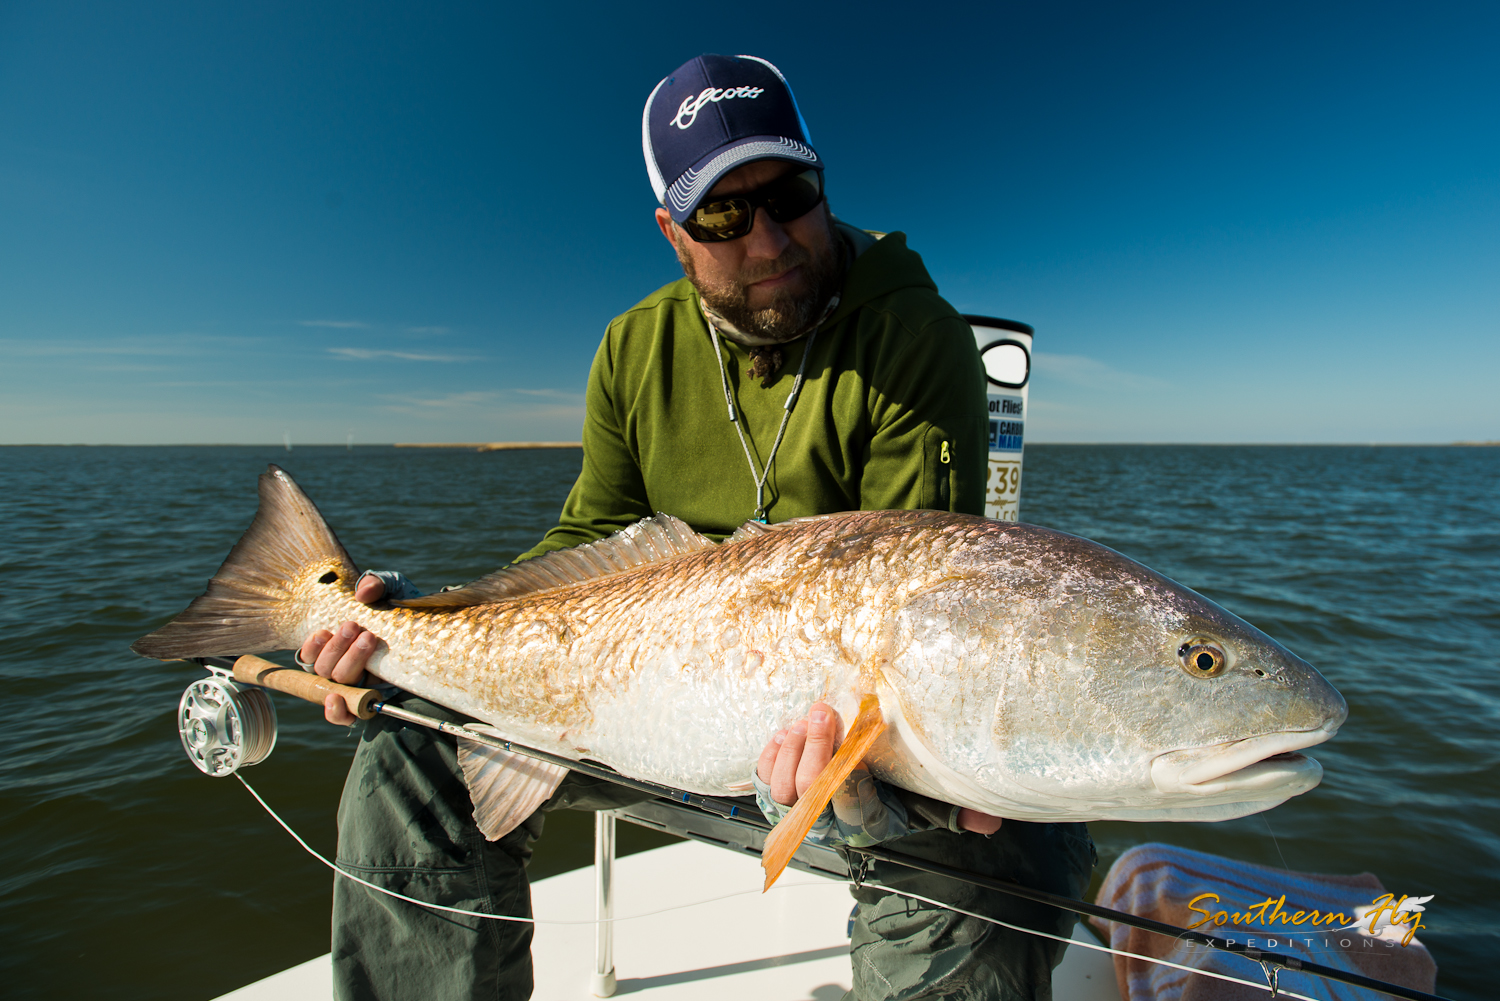 Light Tackle Redfish Guide New Orleans Southern Fly Expeditions